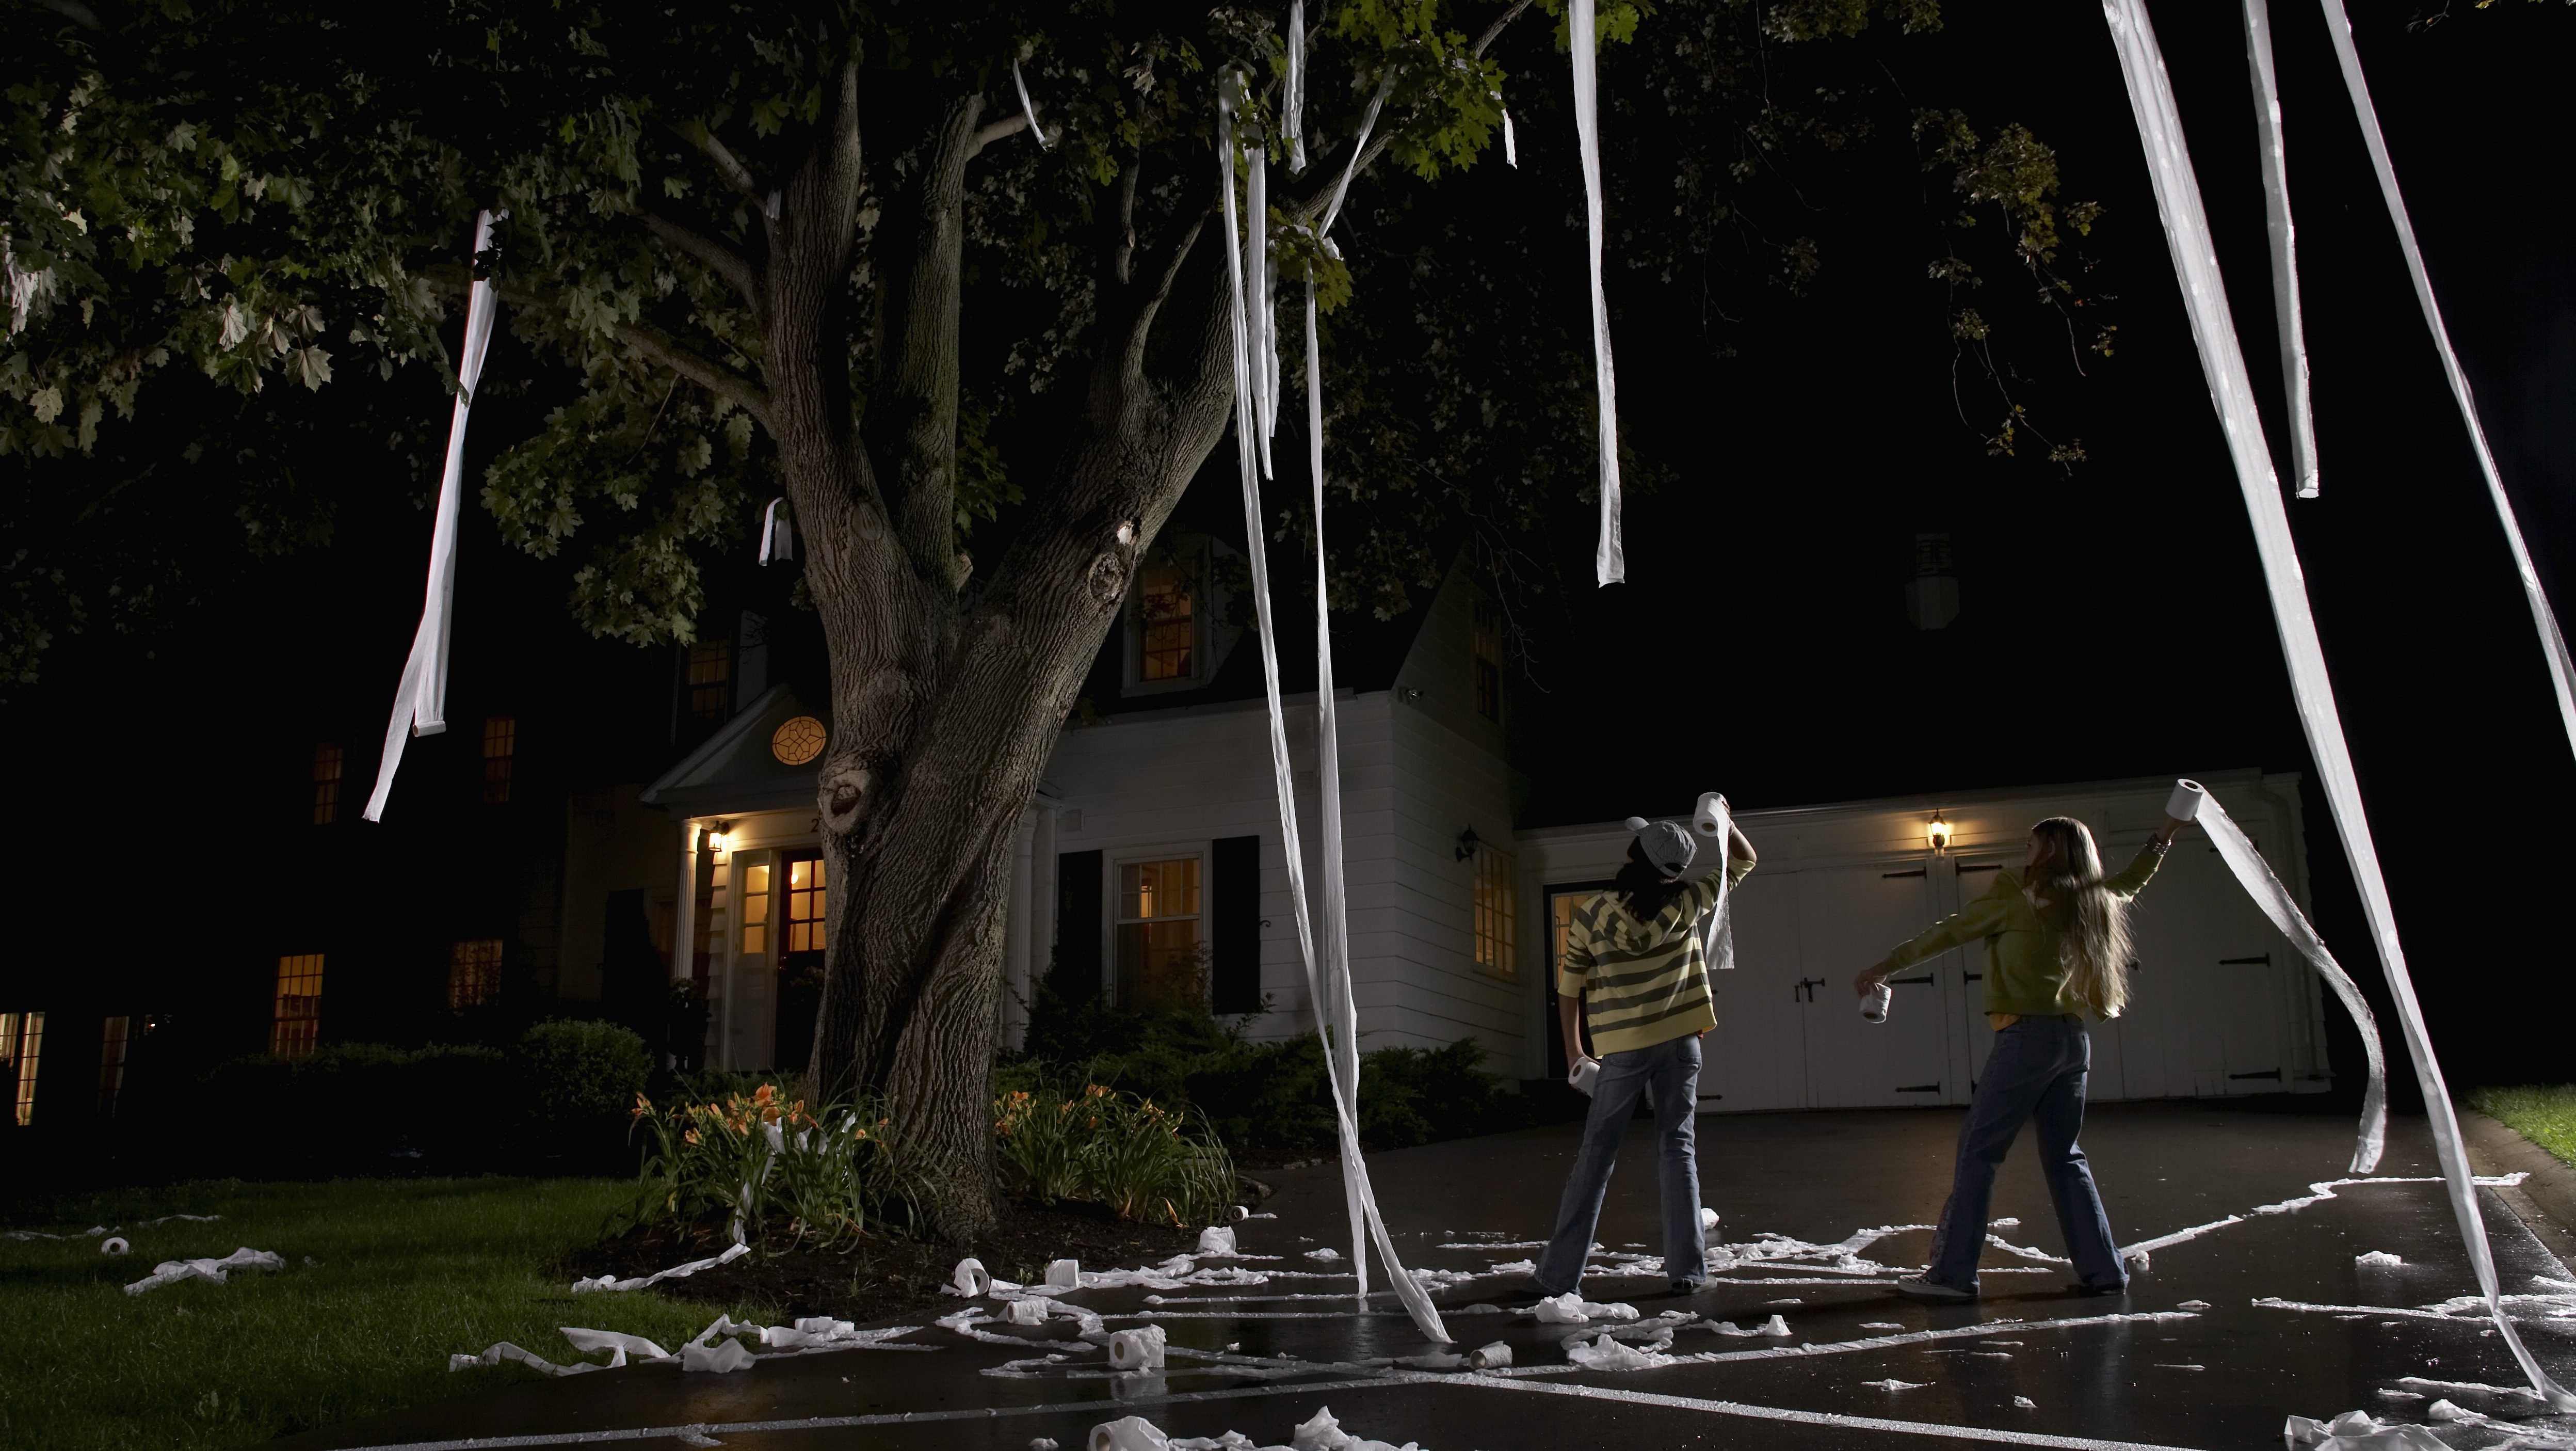 Two girls throwing toilet paper across someone's lawn